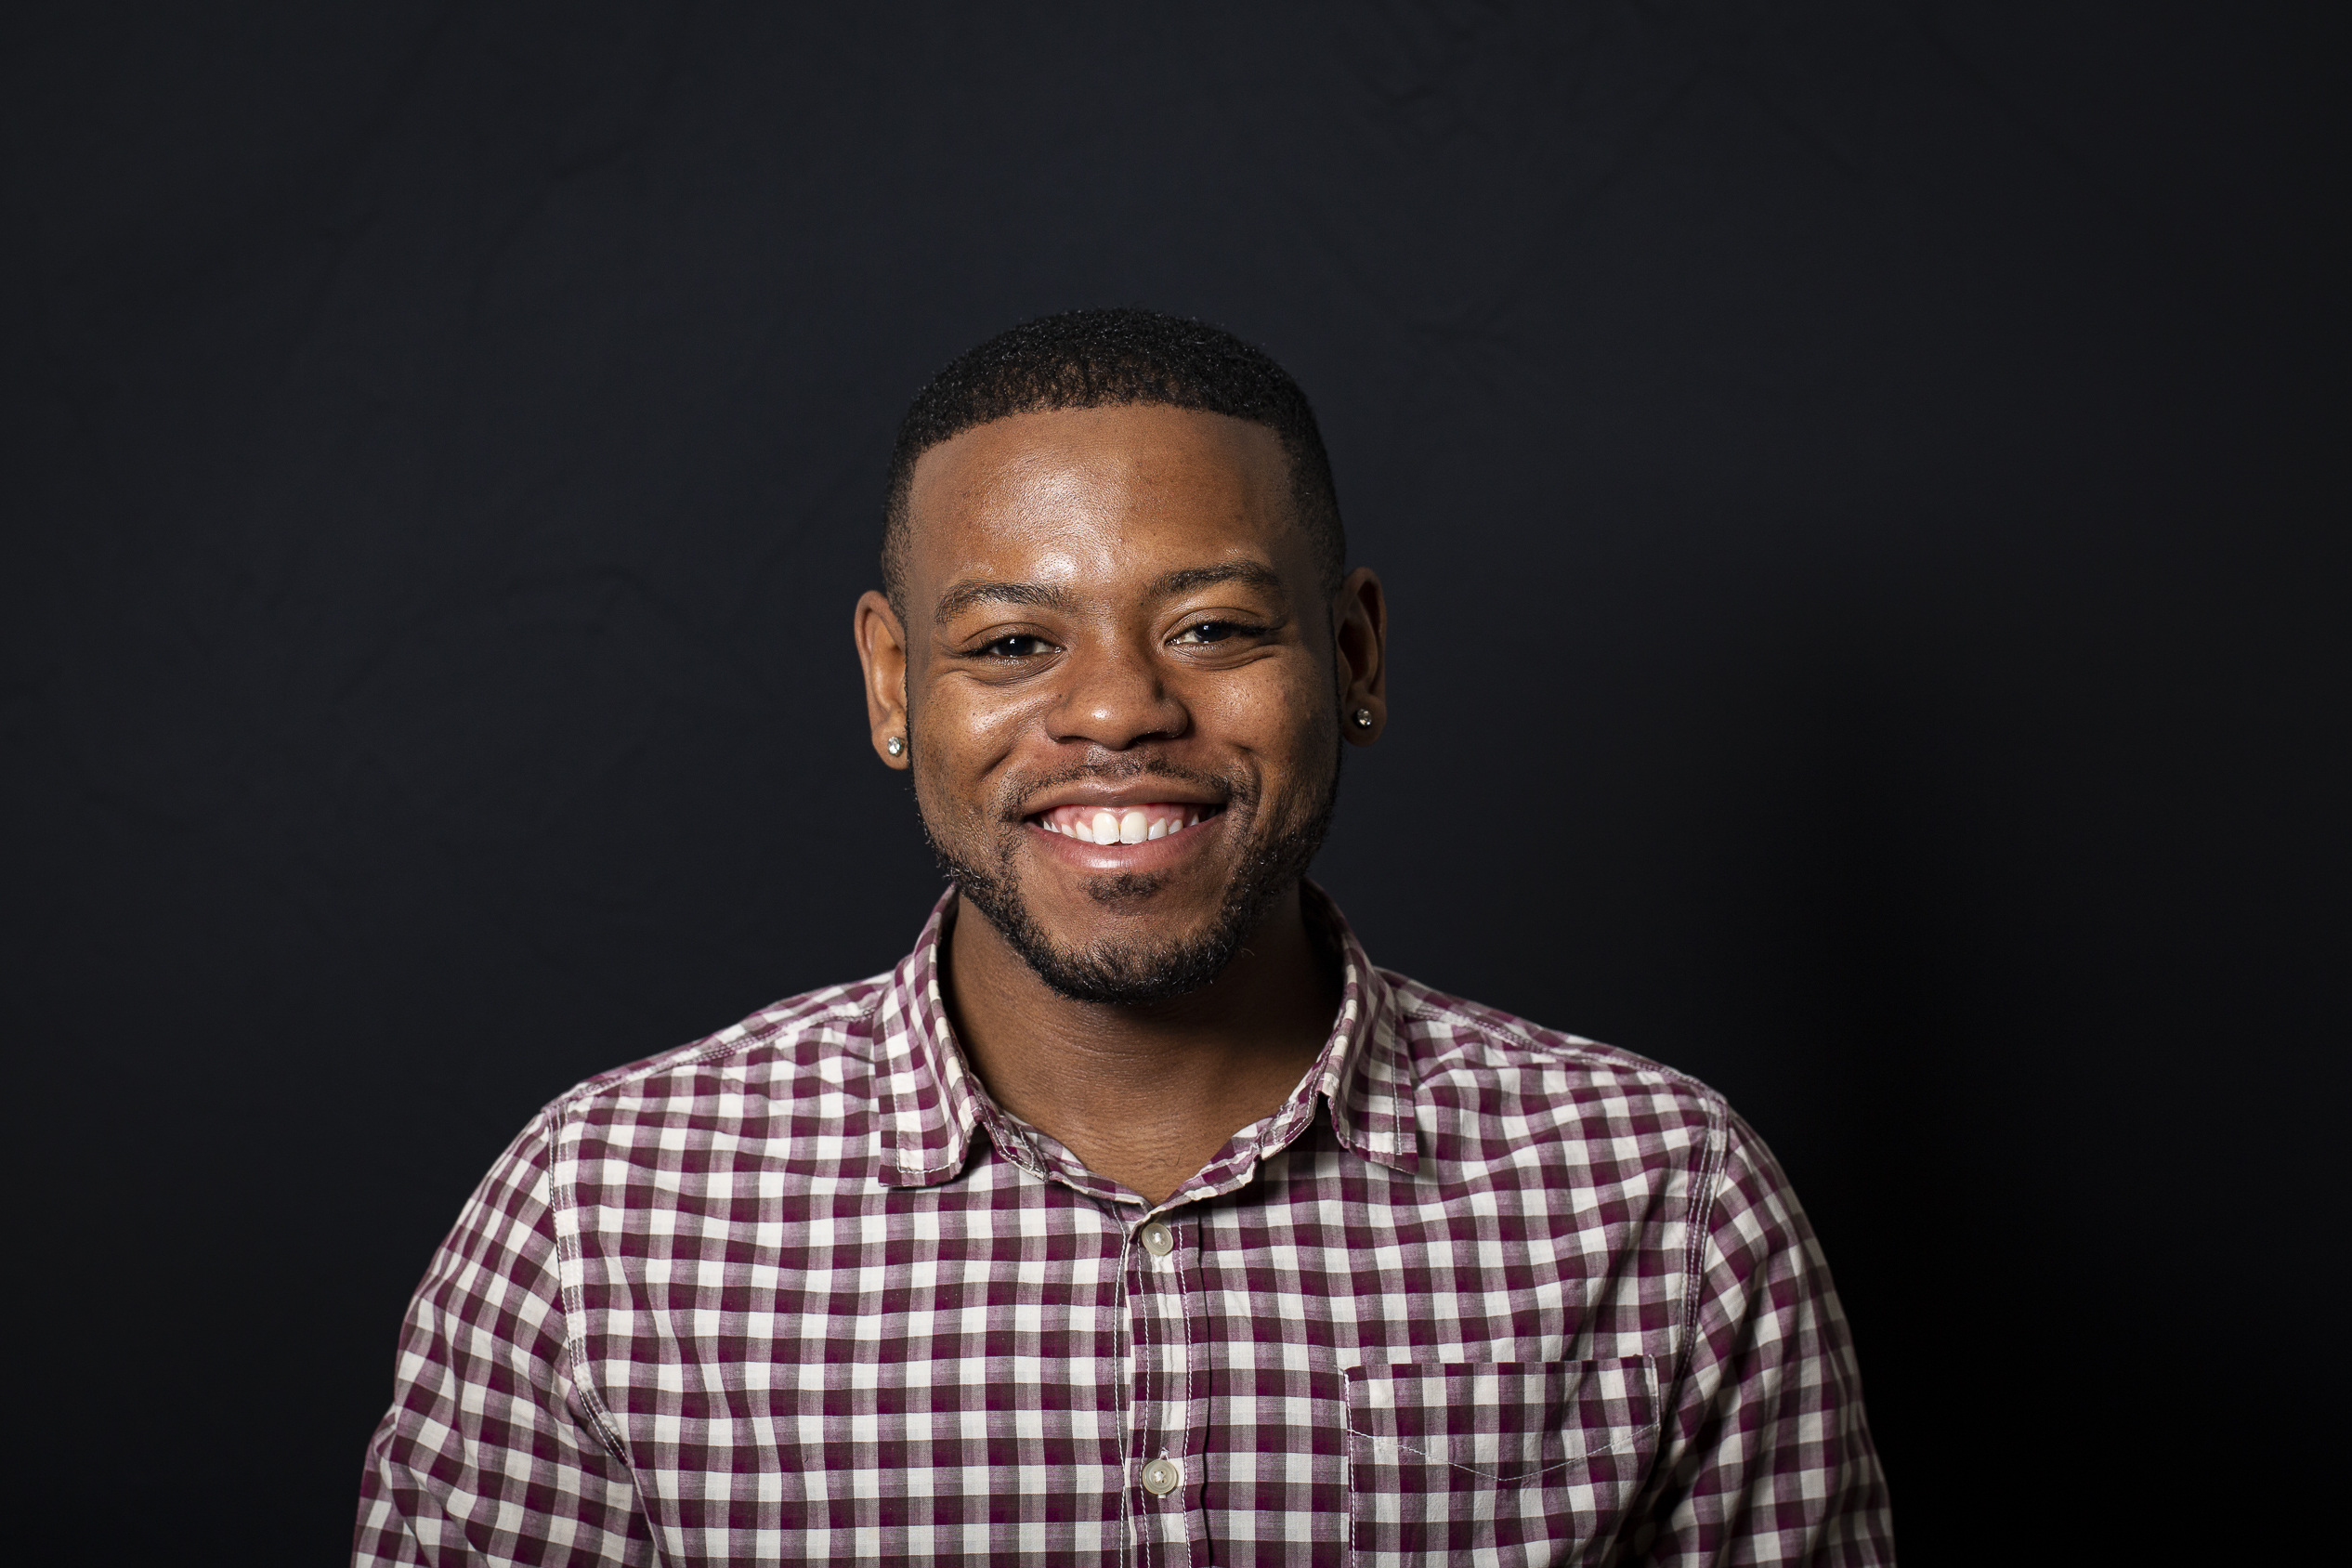 This PhD Student is Building a Mental Health App For Black Youth